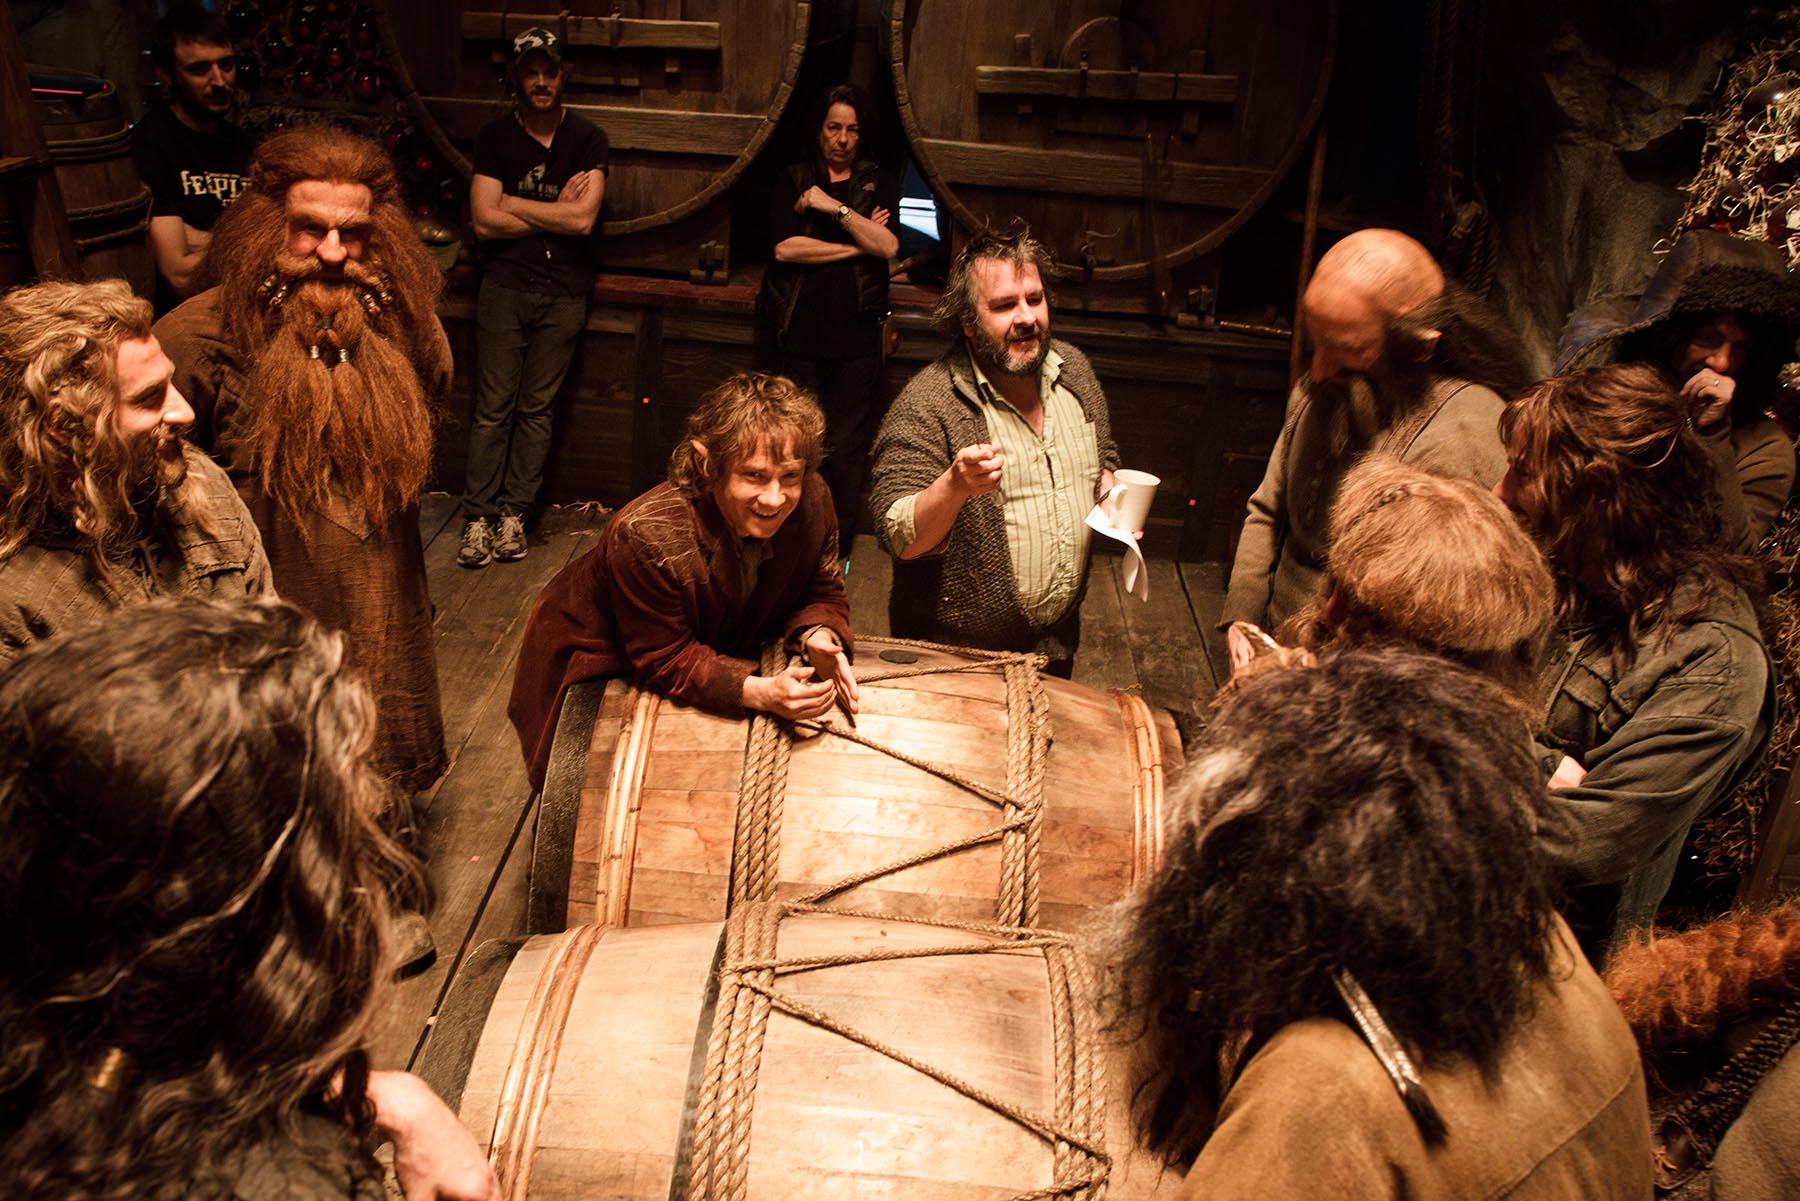 Join us today in wishing a very happy birthday to the inimitable Peter Jackson! 